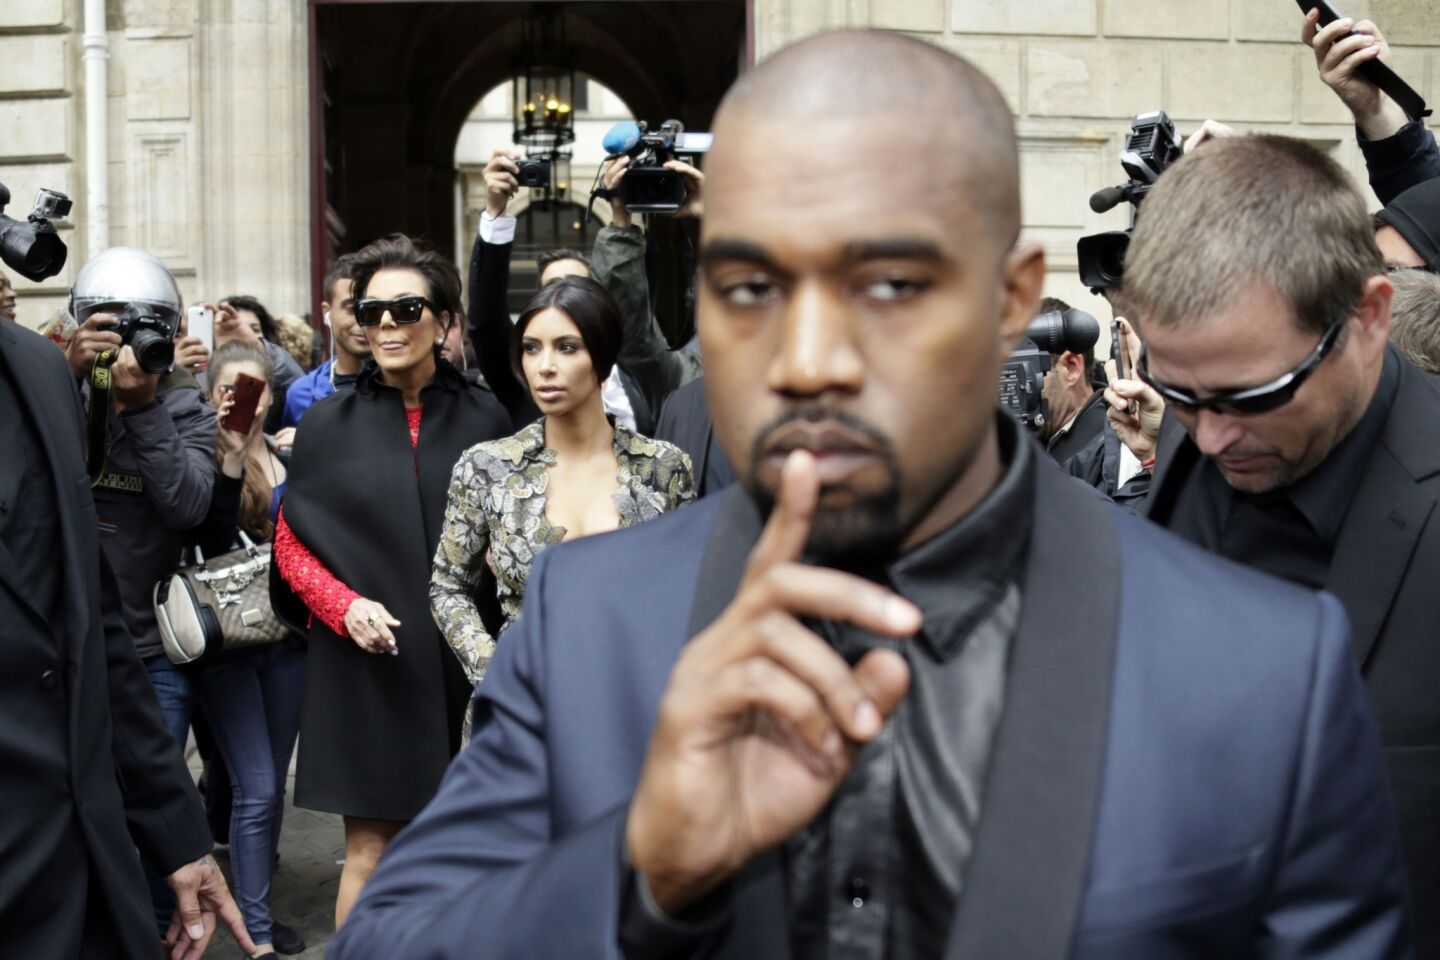 Kanye West appears to drop a hint to the crowd as he, Kim Kardashian and Kris Jenner, left, leave the George V hotel in Paris with baby North West on their way to Valentino's castle for brunch.